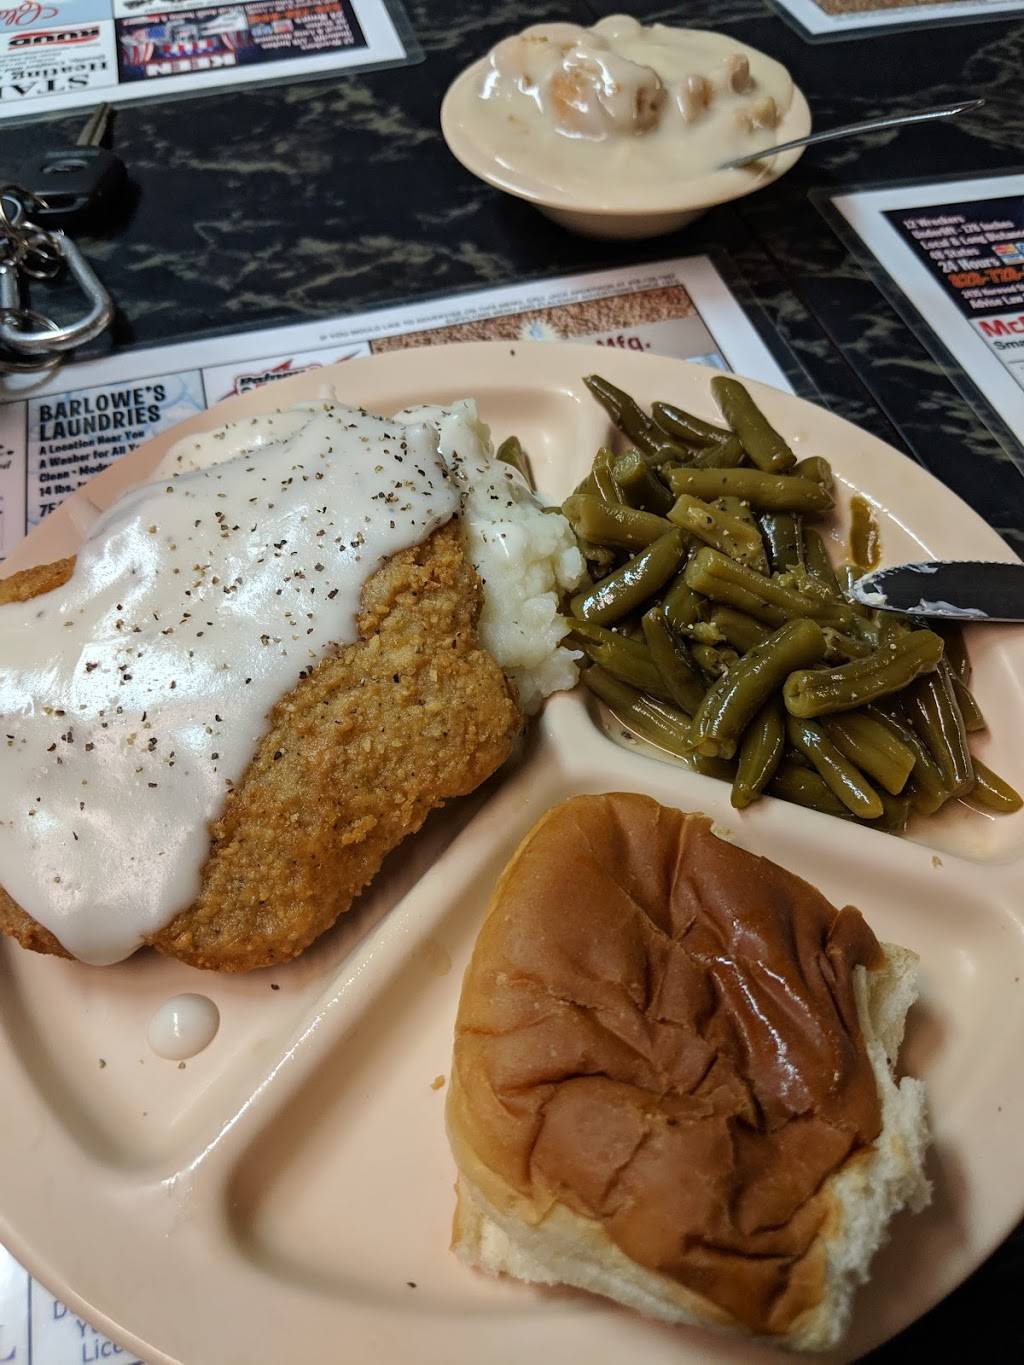 Clarences Friendly Lunch | restaurant | 1871 Norwood St SW, Lenoir, NC 28645, USA | 8287284343 OR +1 828-728-4343